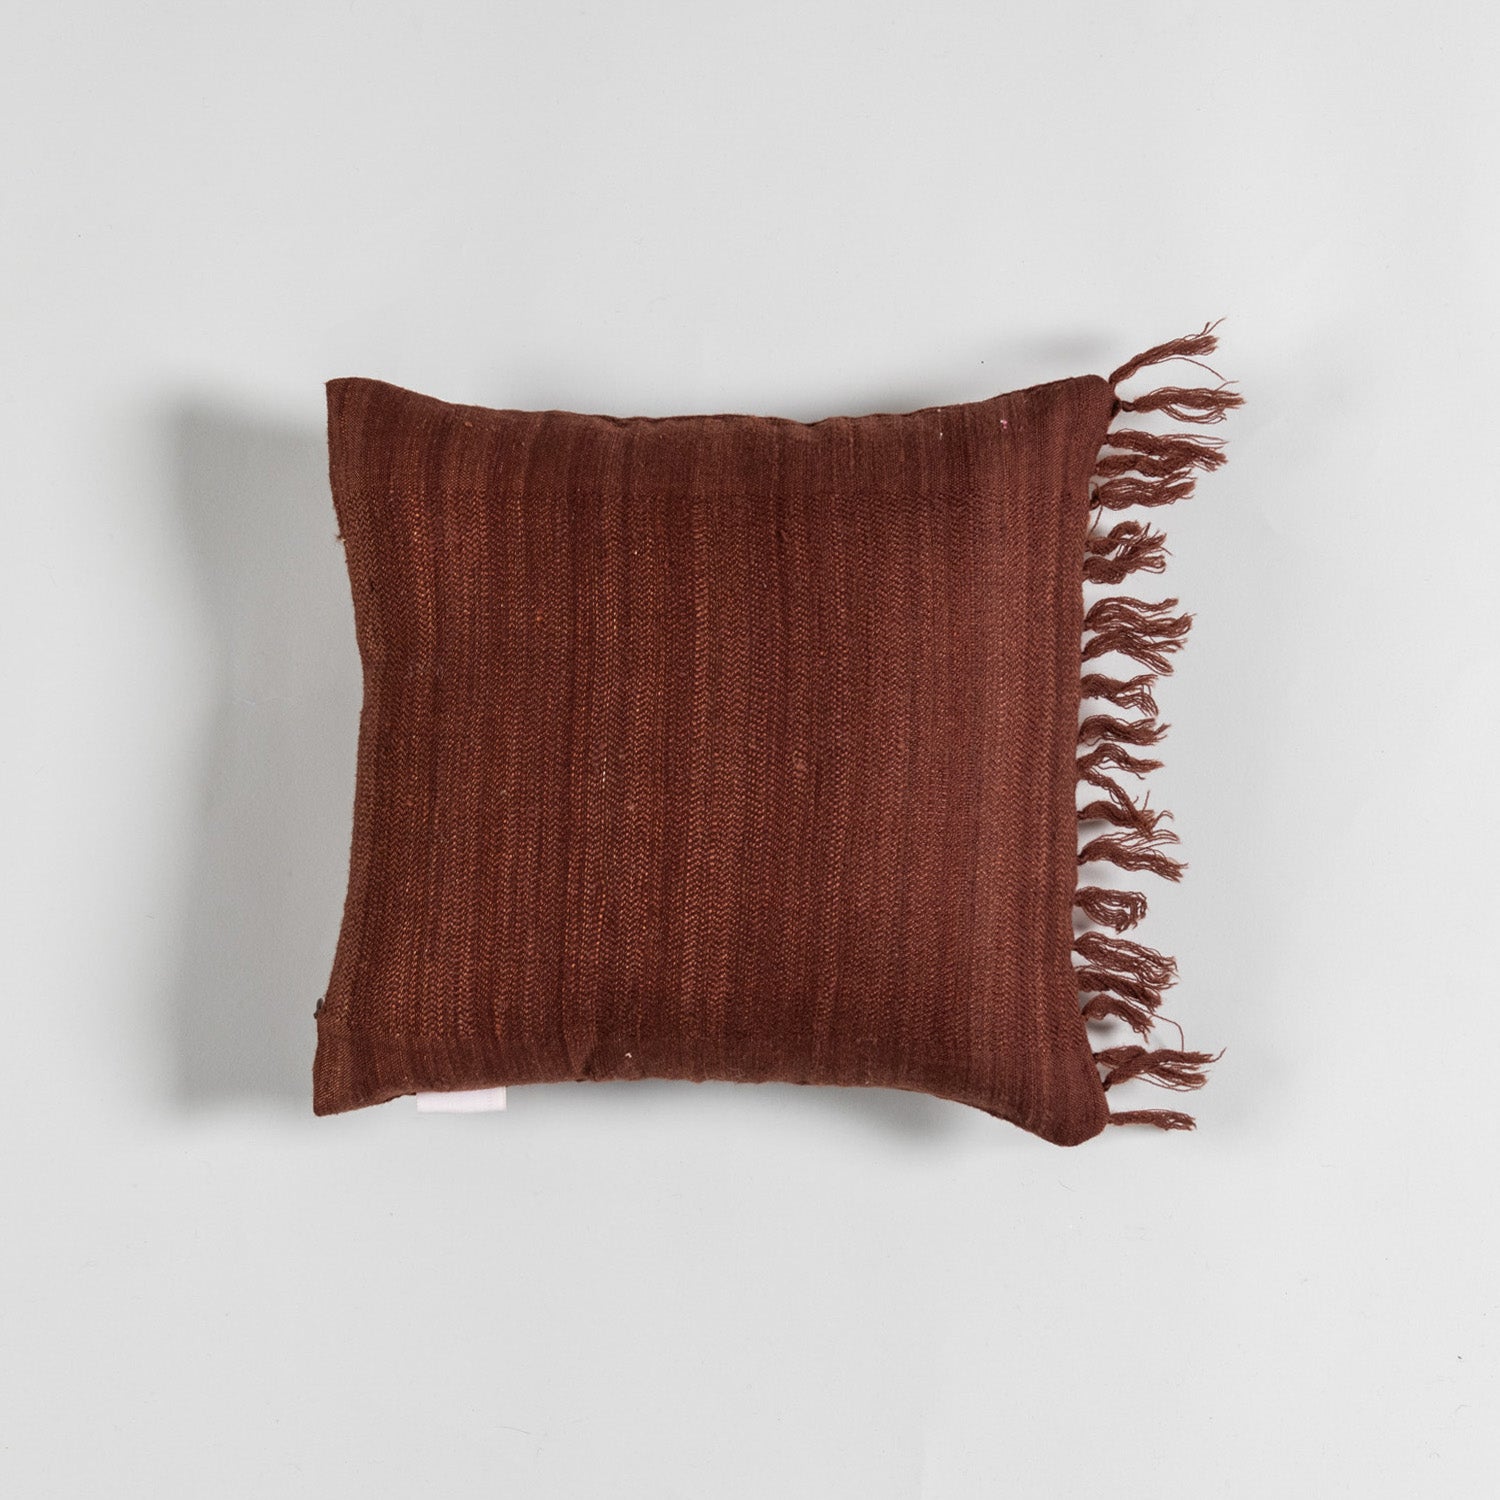 Handwoven Upcycled Chocolate Brown Wool & Oak Silk Cushion Cover - 12x12